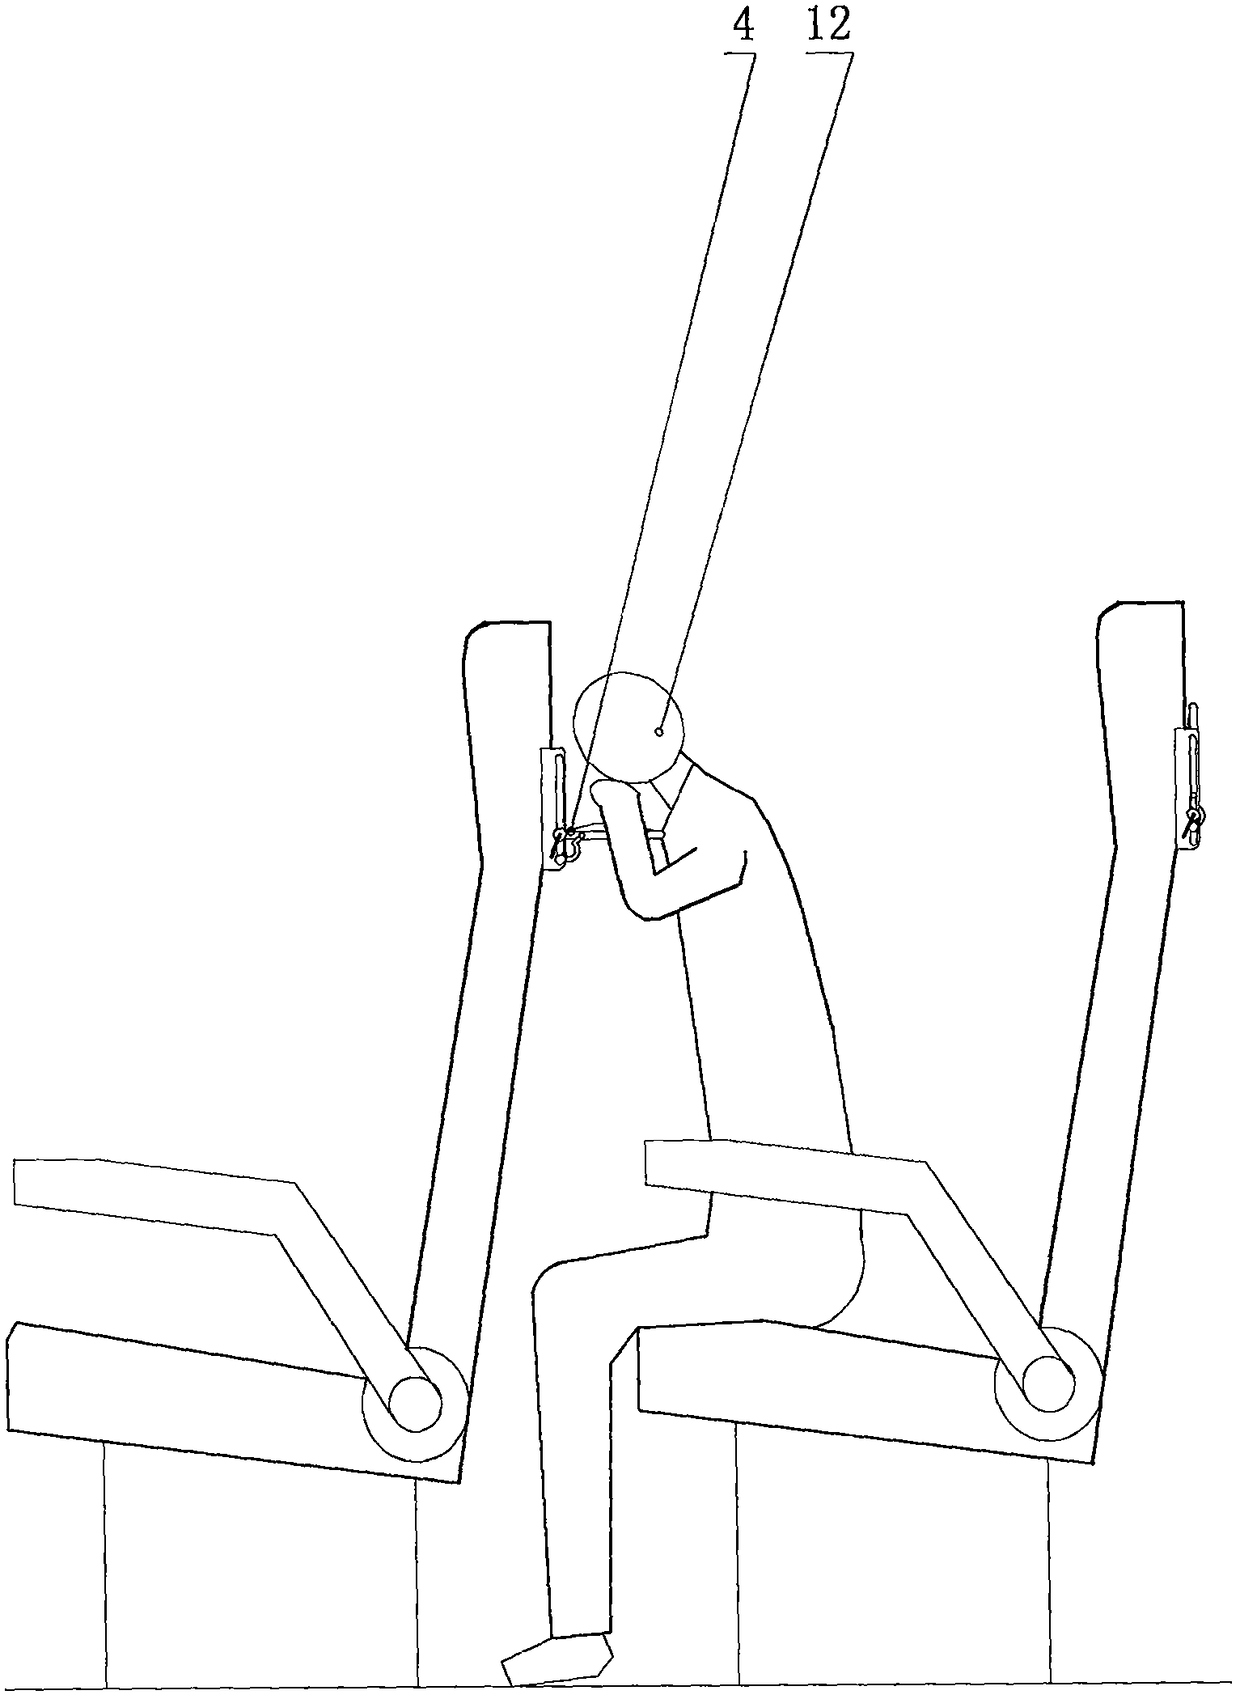 Prone-lying resting device for vehicle chair